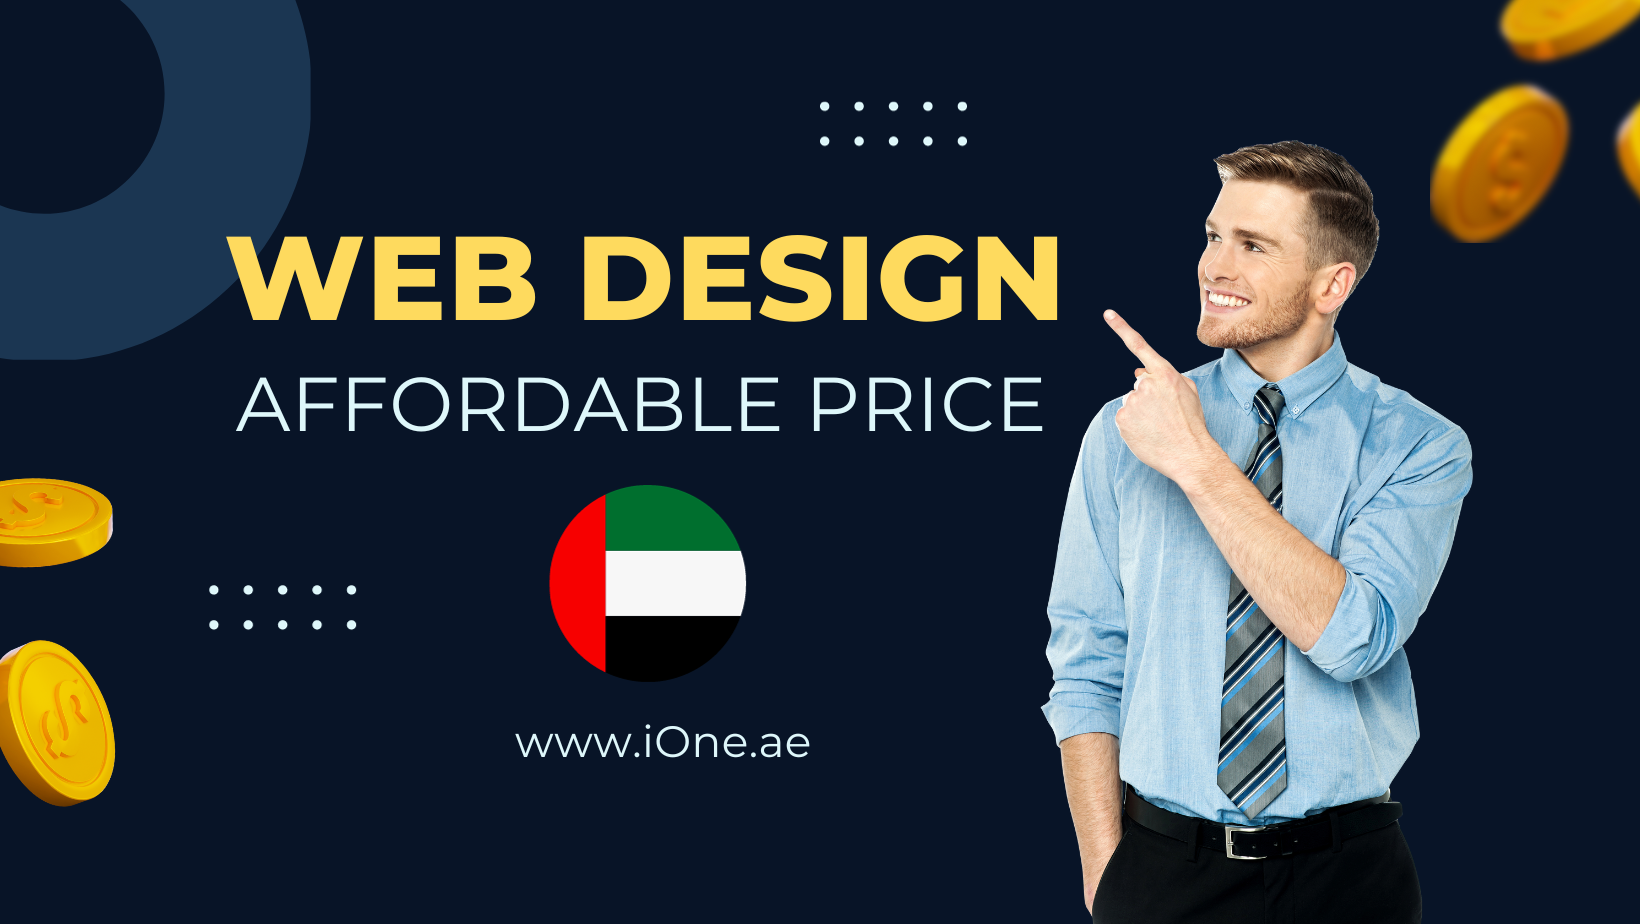 Website Design Affordable Price and Low Cost : Web Design Abu Dhabi : Creating Stunning Websites in Abu Dhabi : Affordable Web Design Services. Web Design and Development Company.